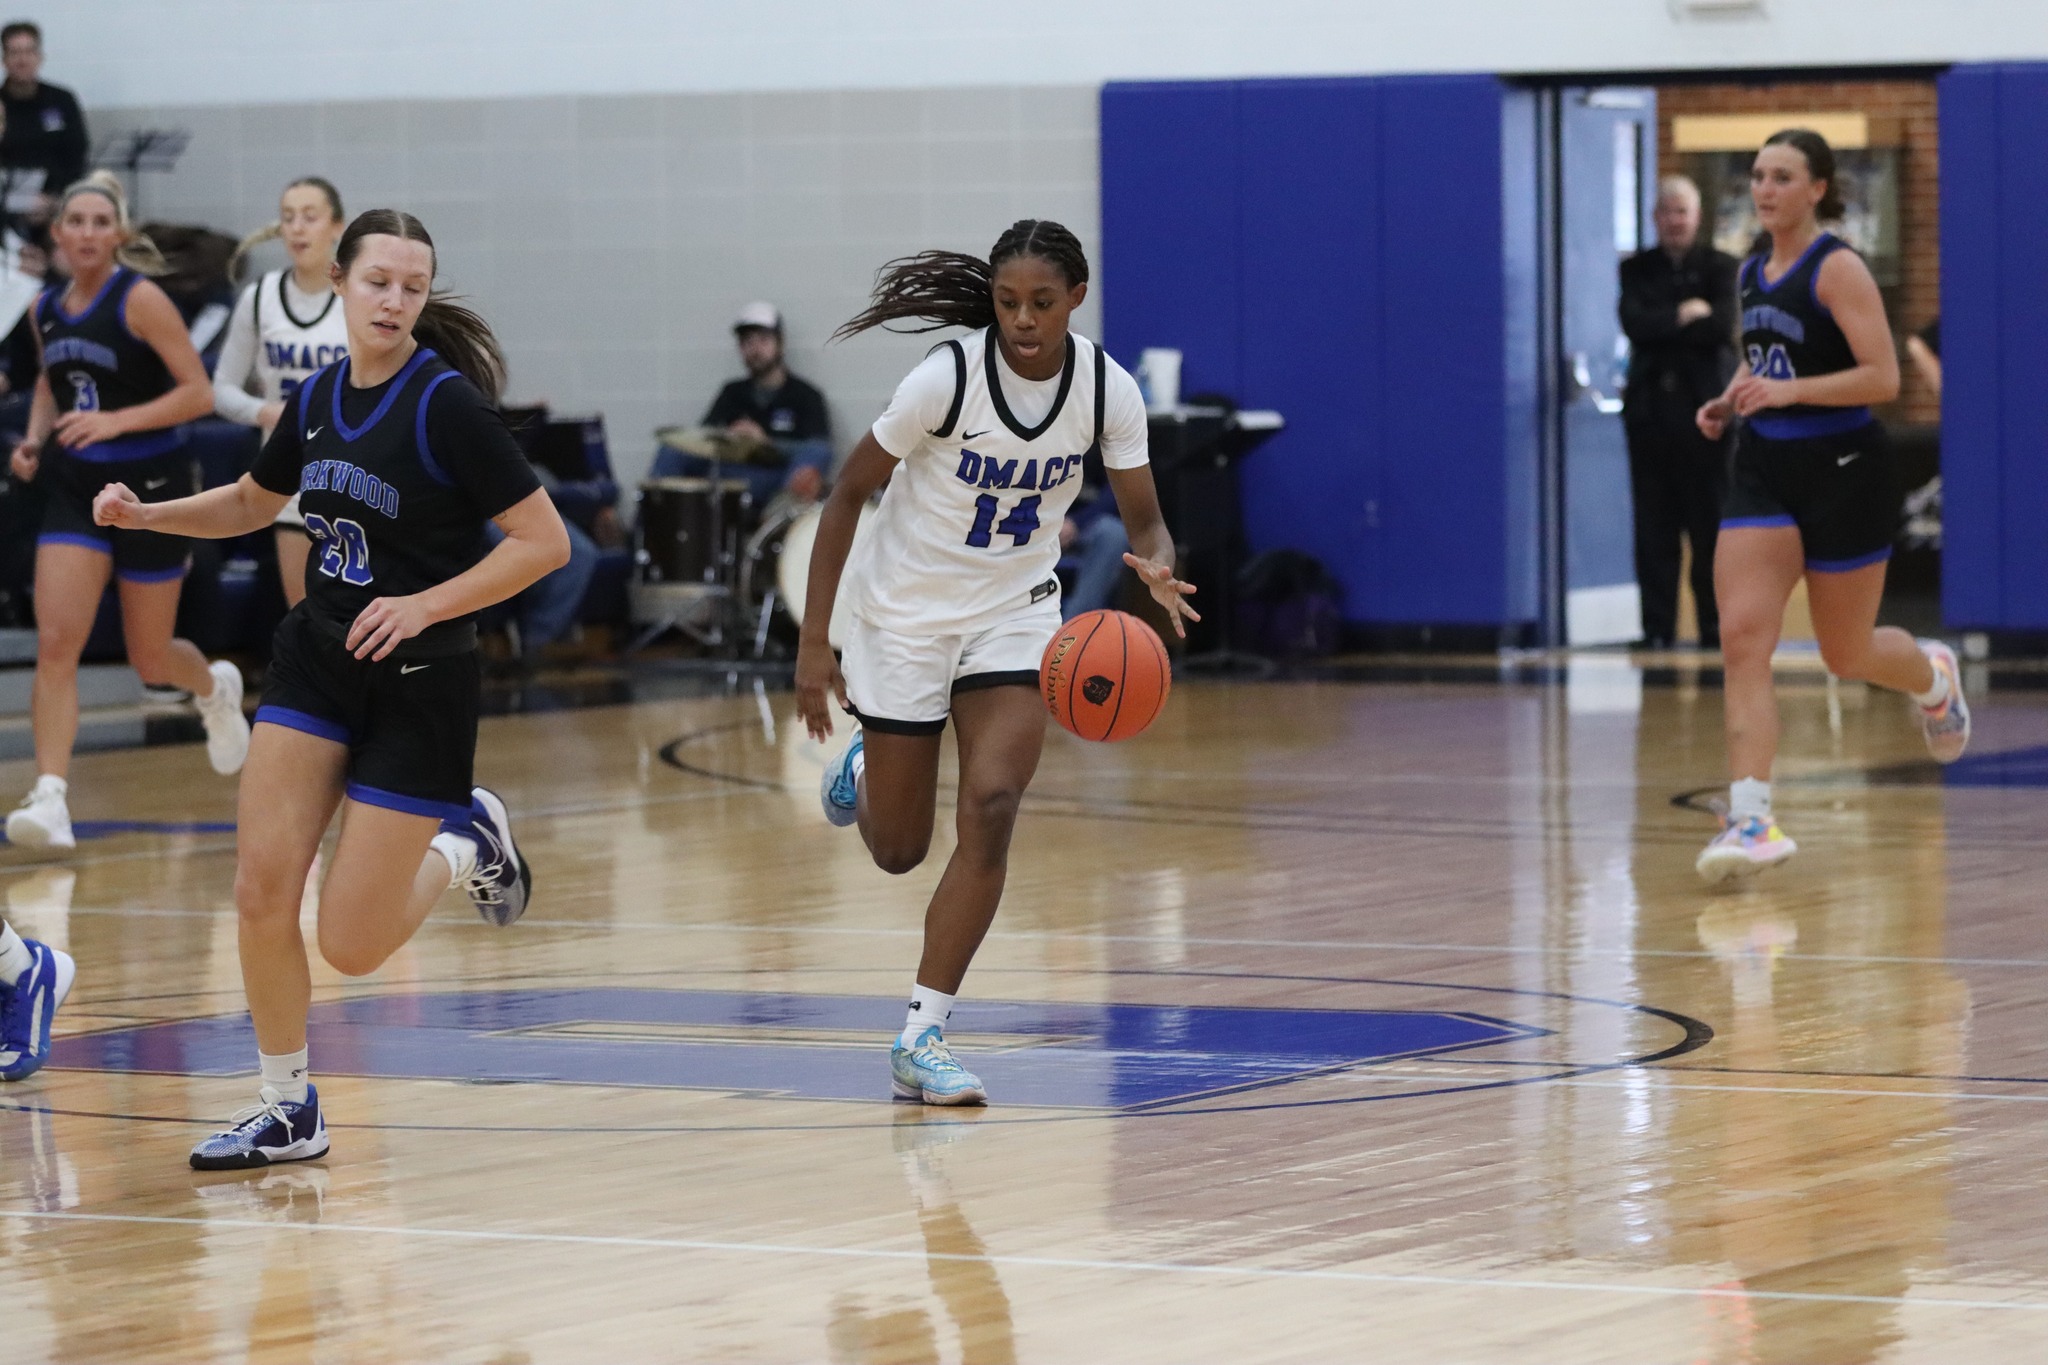 Ainley's double-double lifts DMACC women's basketball team past SWCC, 64-56